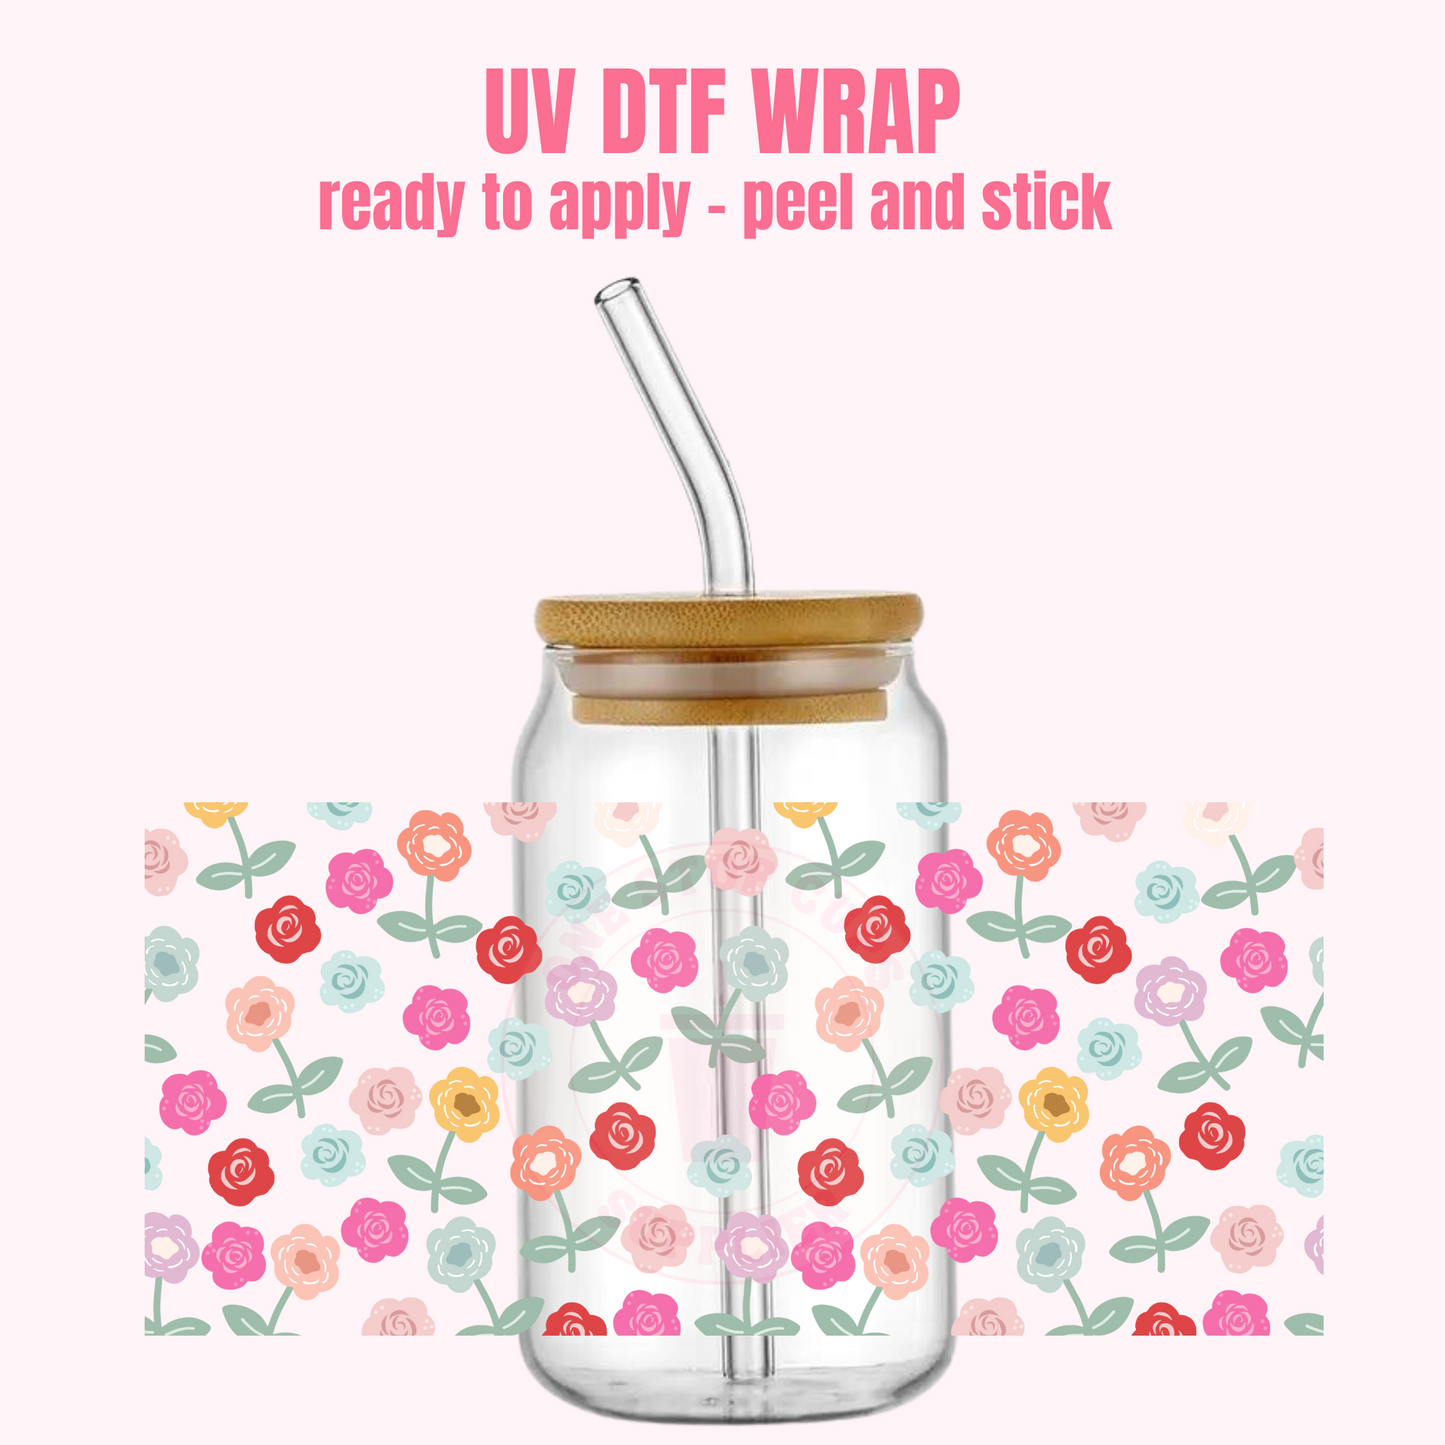 UV DTF CUP WRAP Flower P52